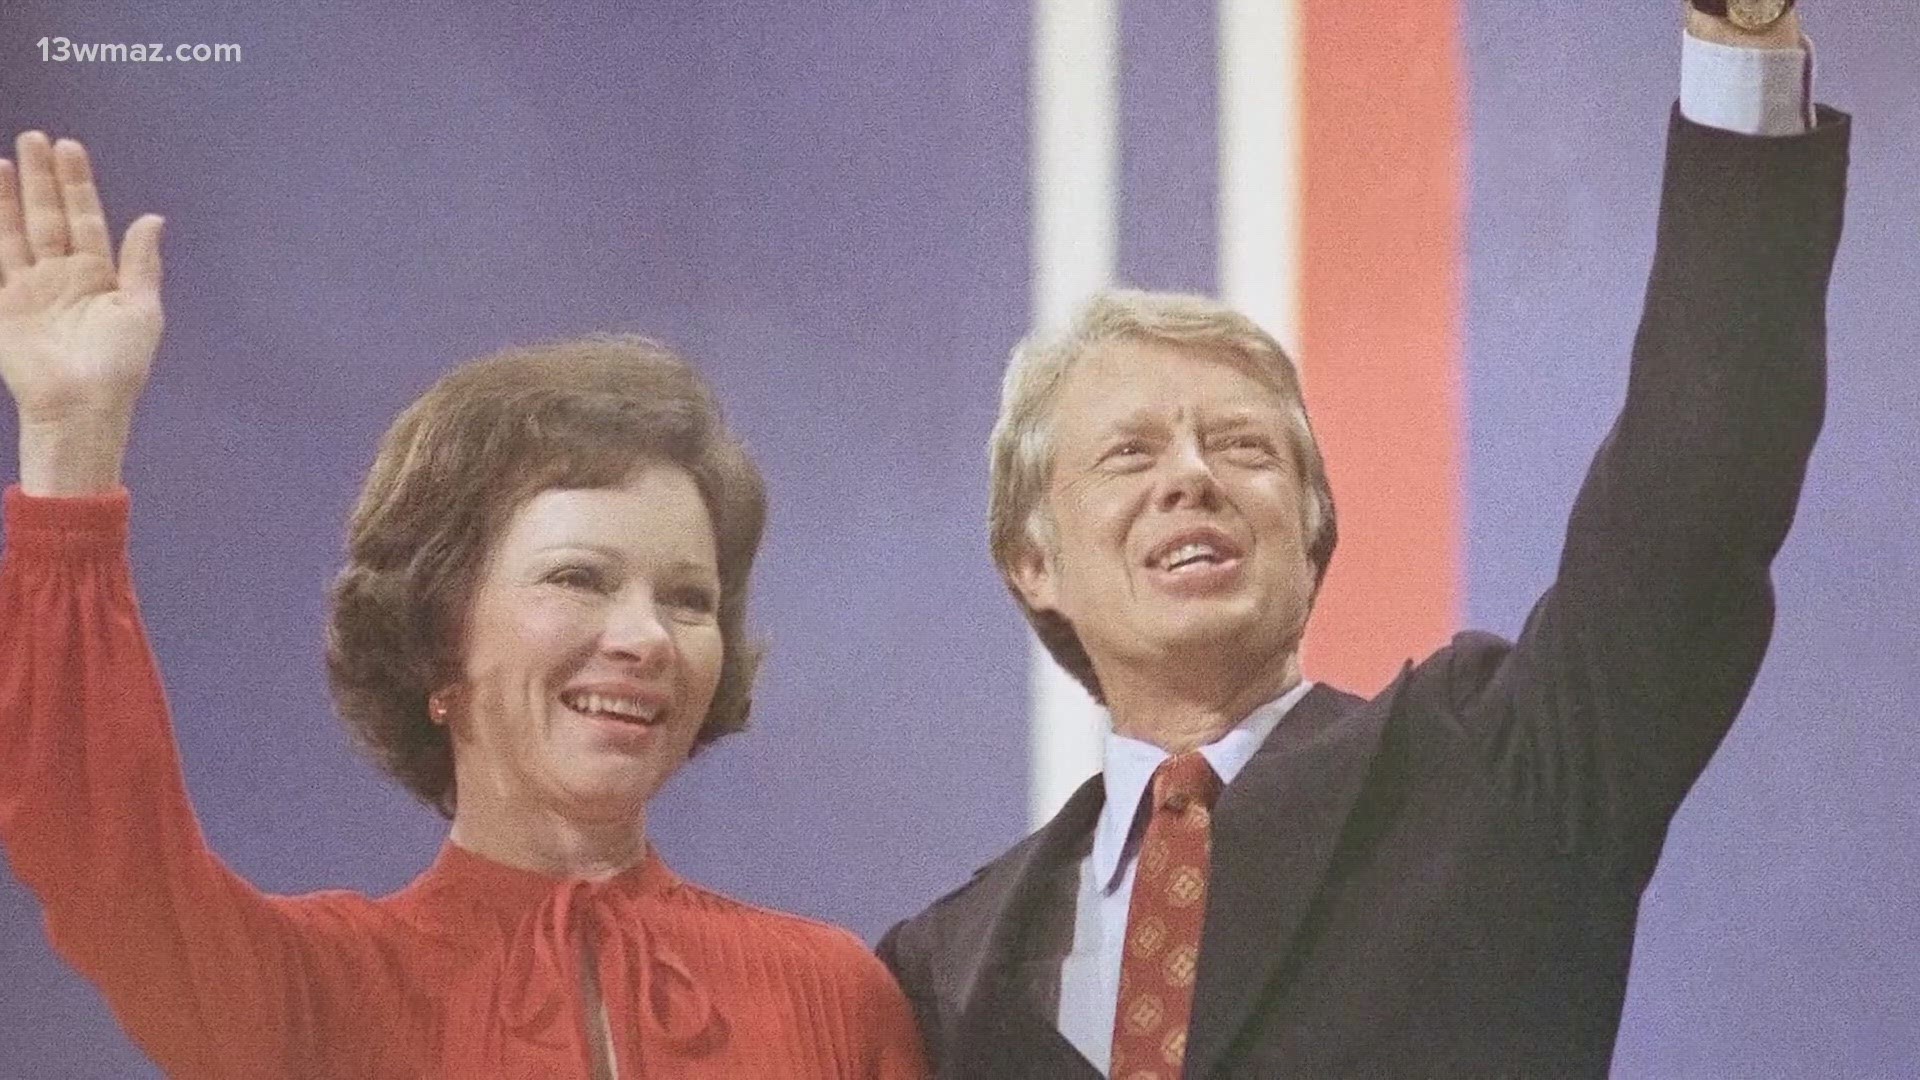 A love story that's lasted a lifetime. On Sunday, November 19, Rosalynn Carter passed away at age 96.